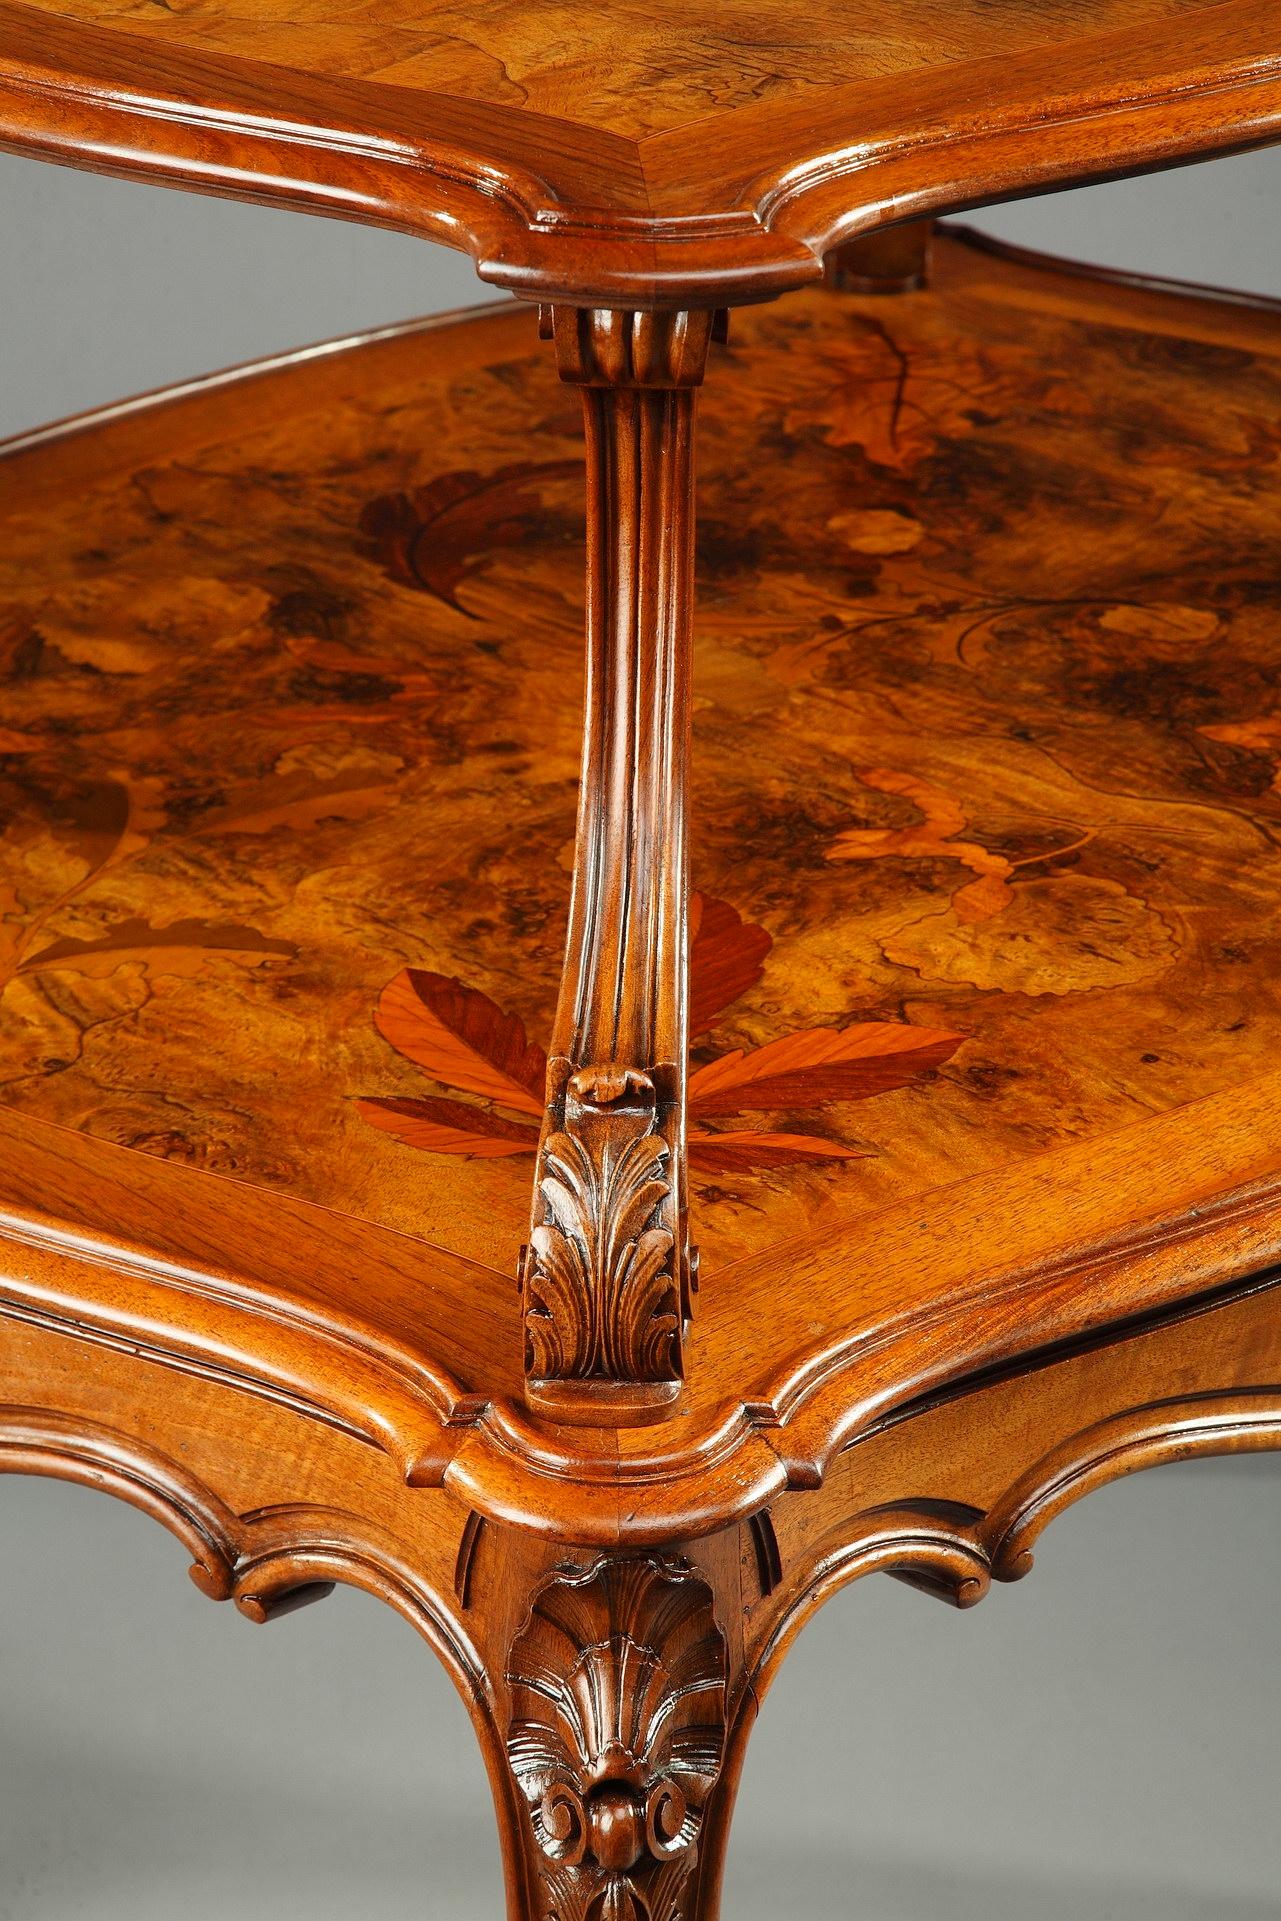 Wooden Tea Table with Polychrome Marquetry Decoration, Art Nouveau Period 8